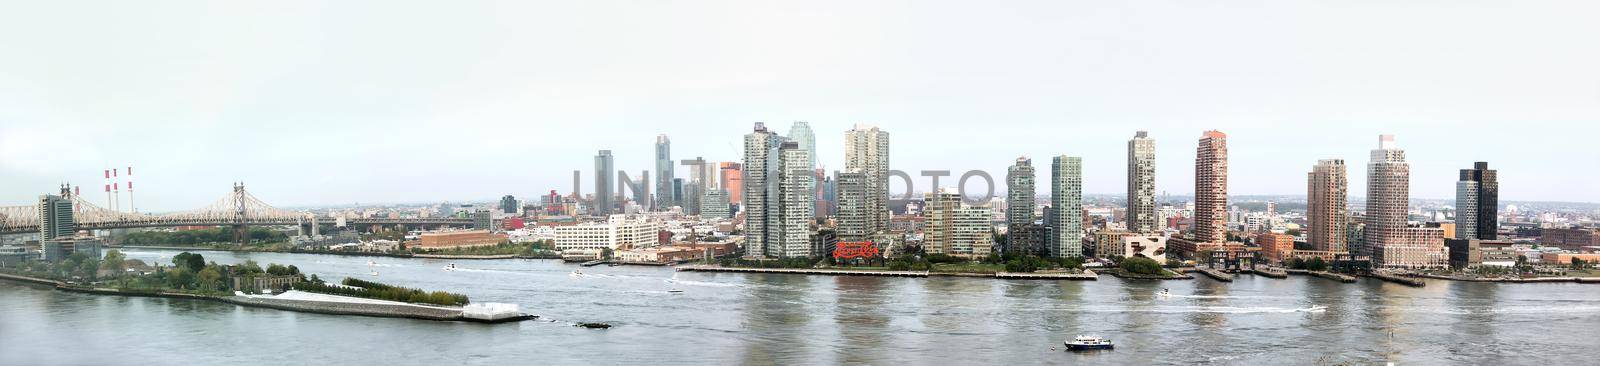 Panoramic views of East River from United Nations Building by palinchak